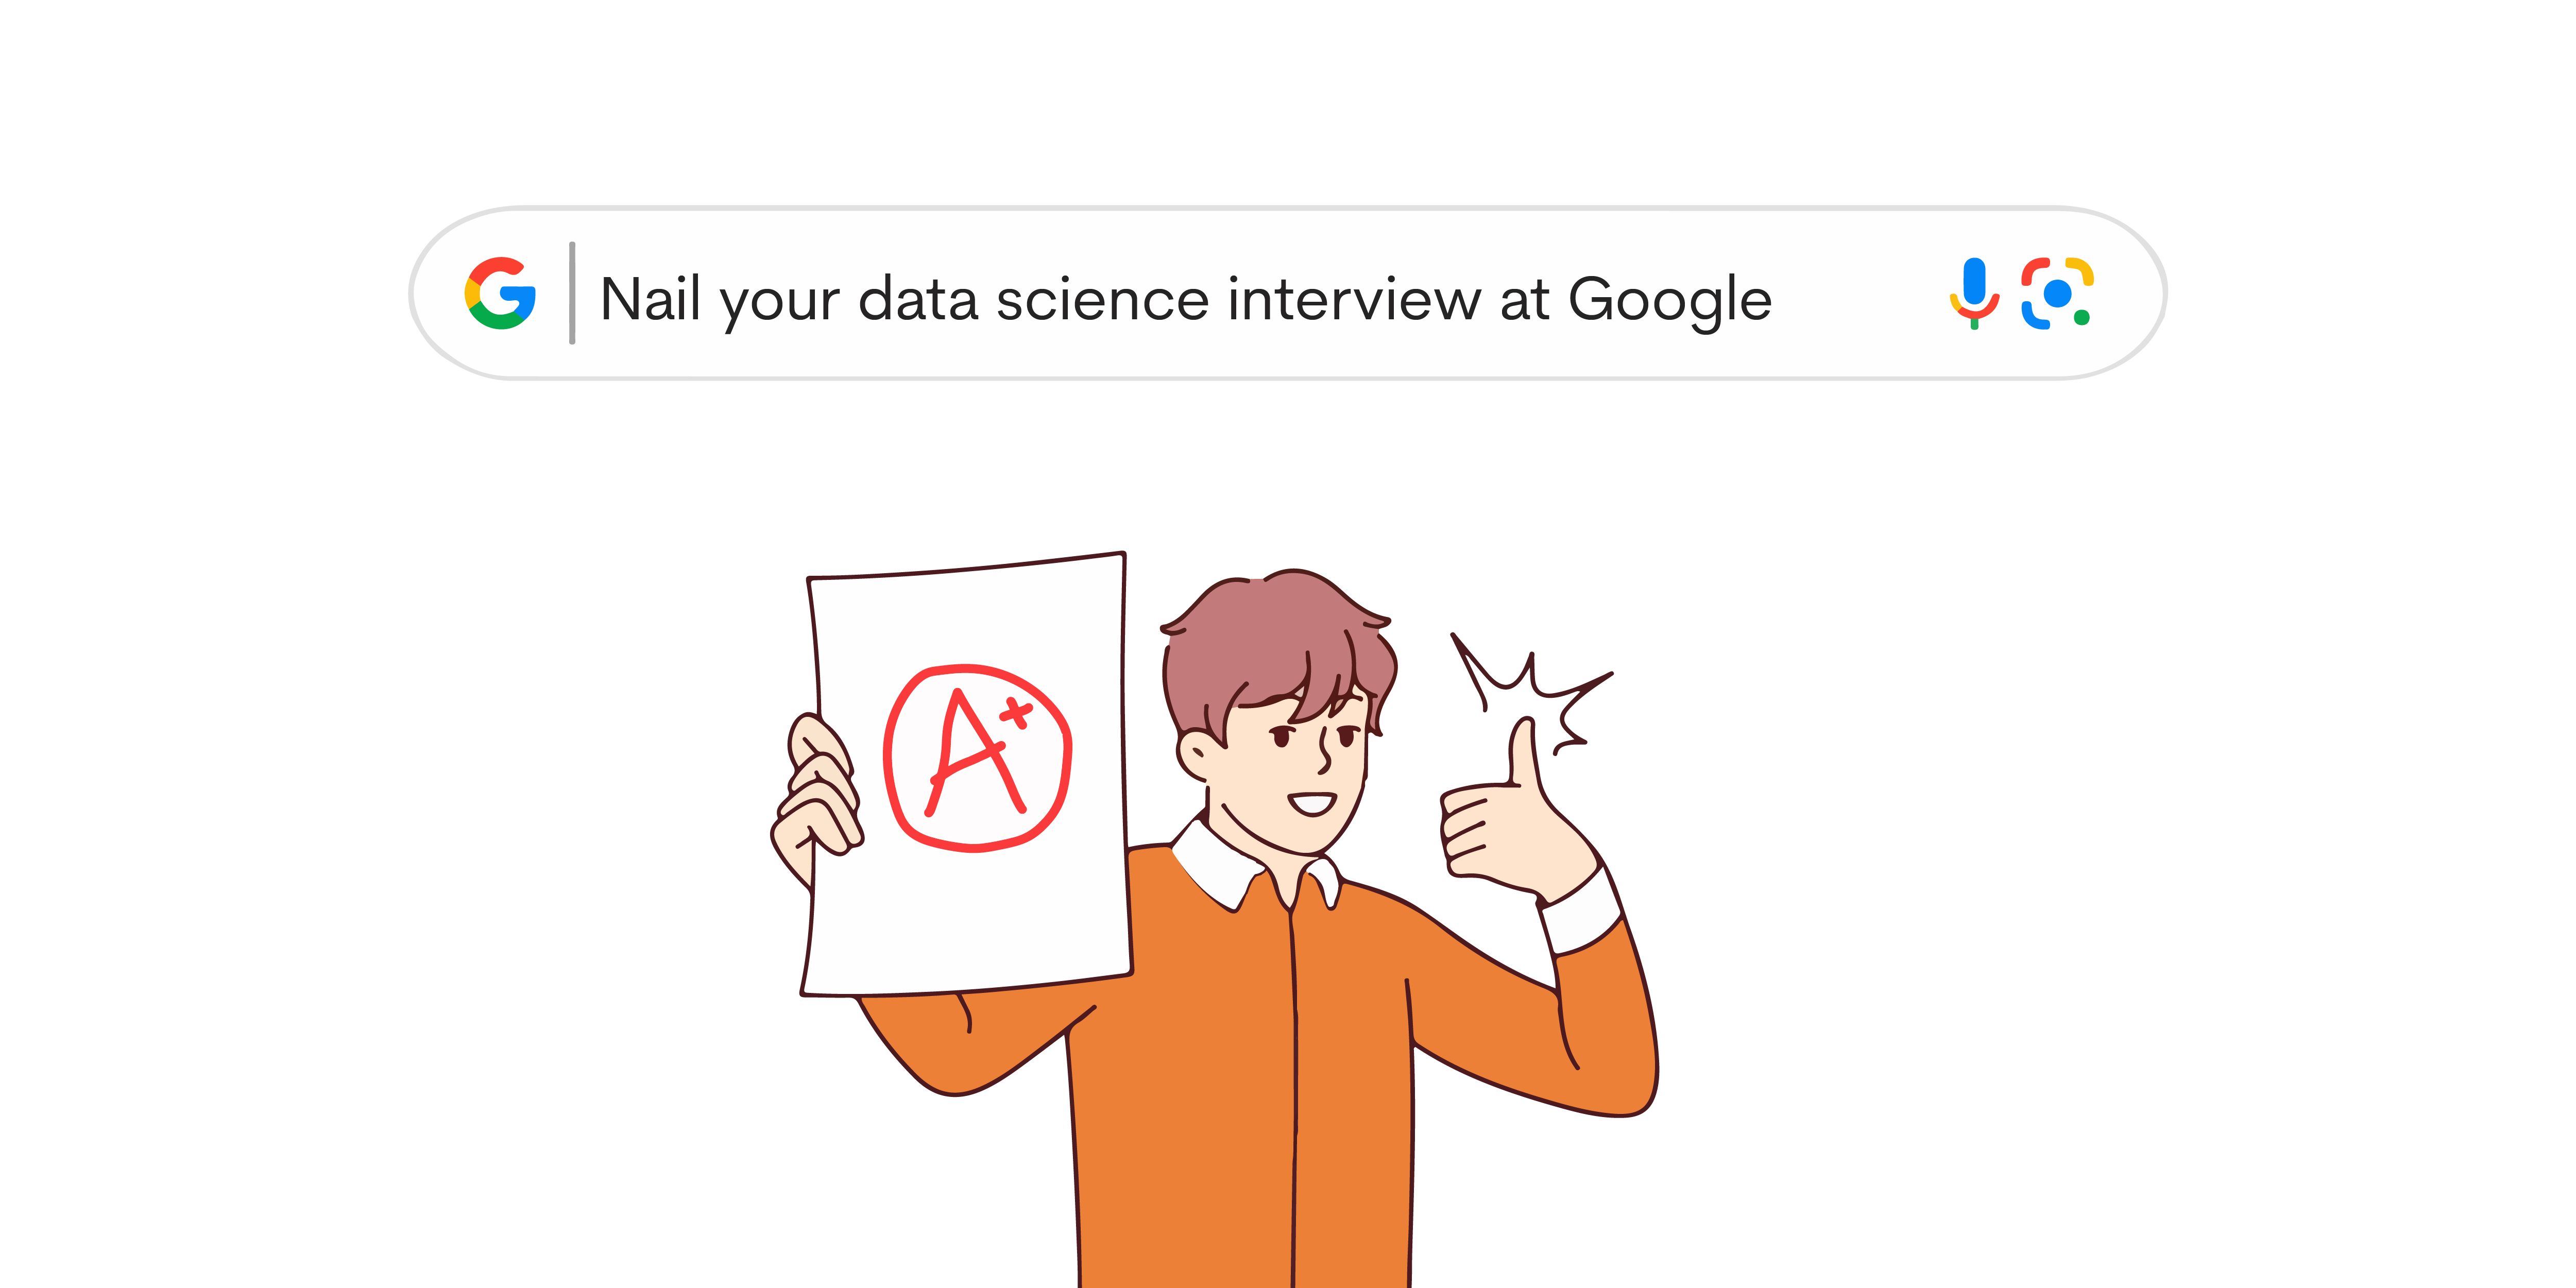 Nail your data science interview at Google